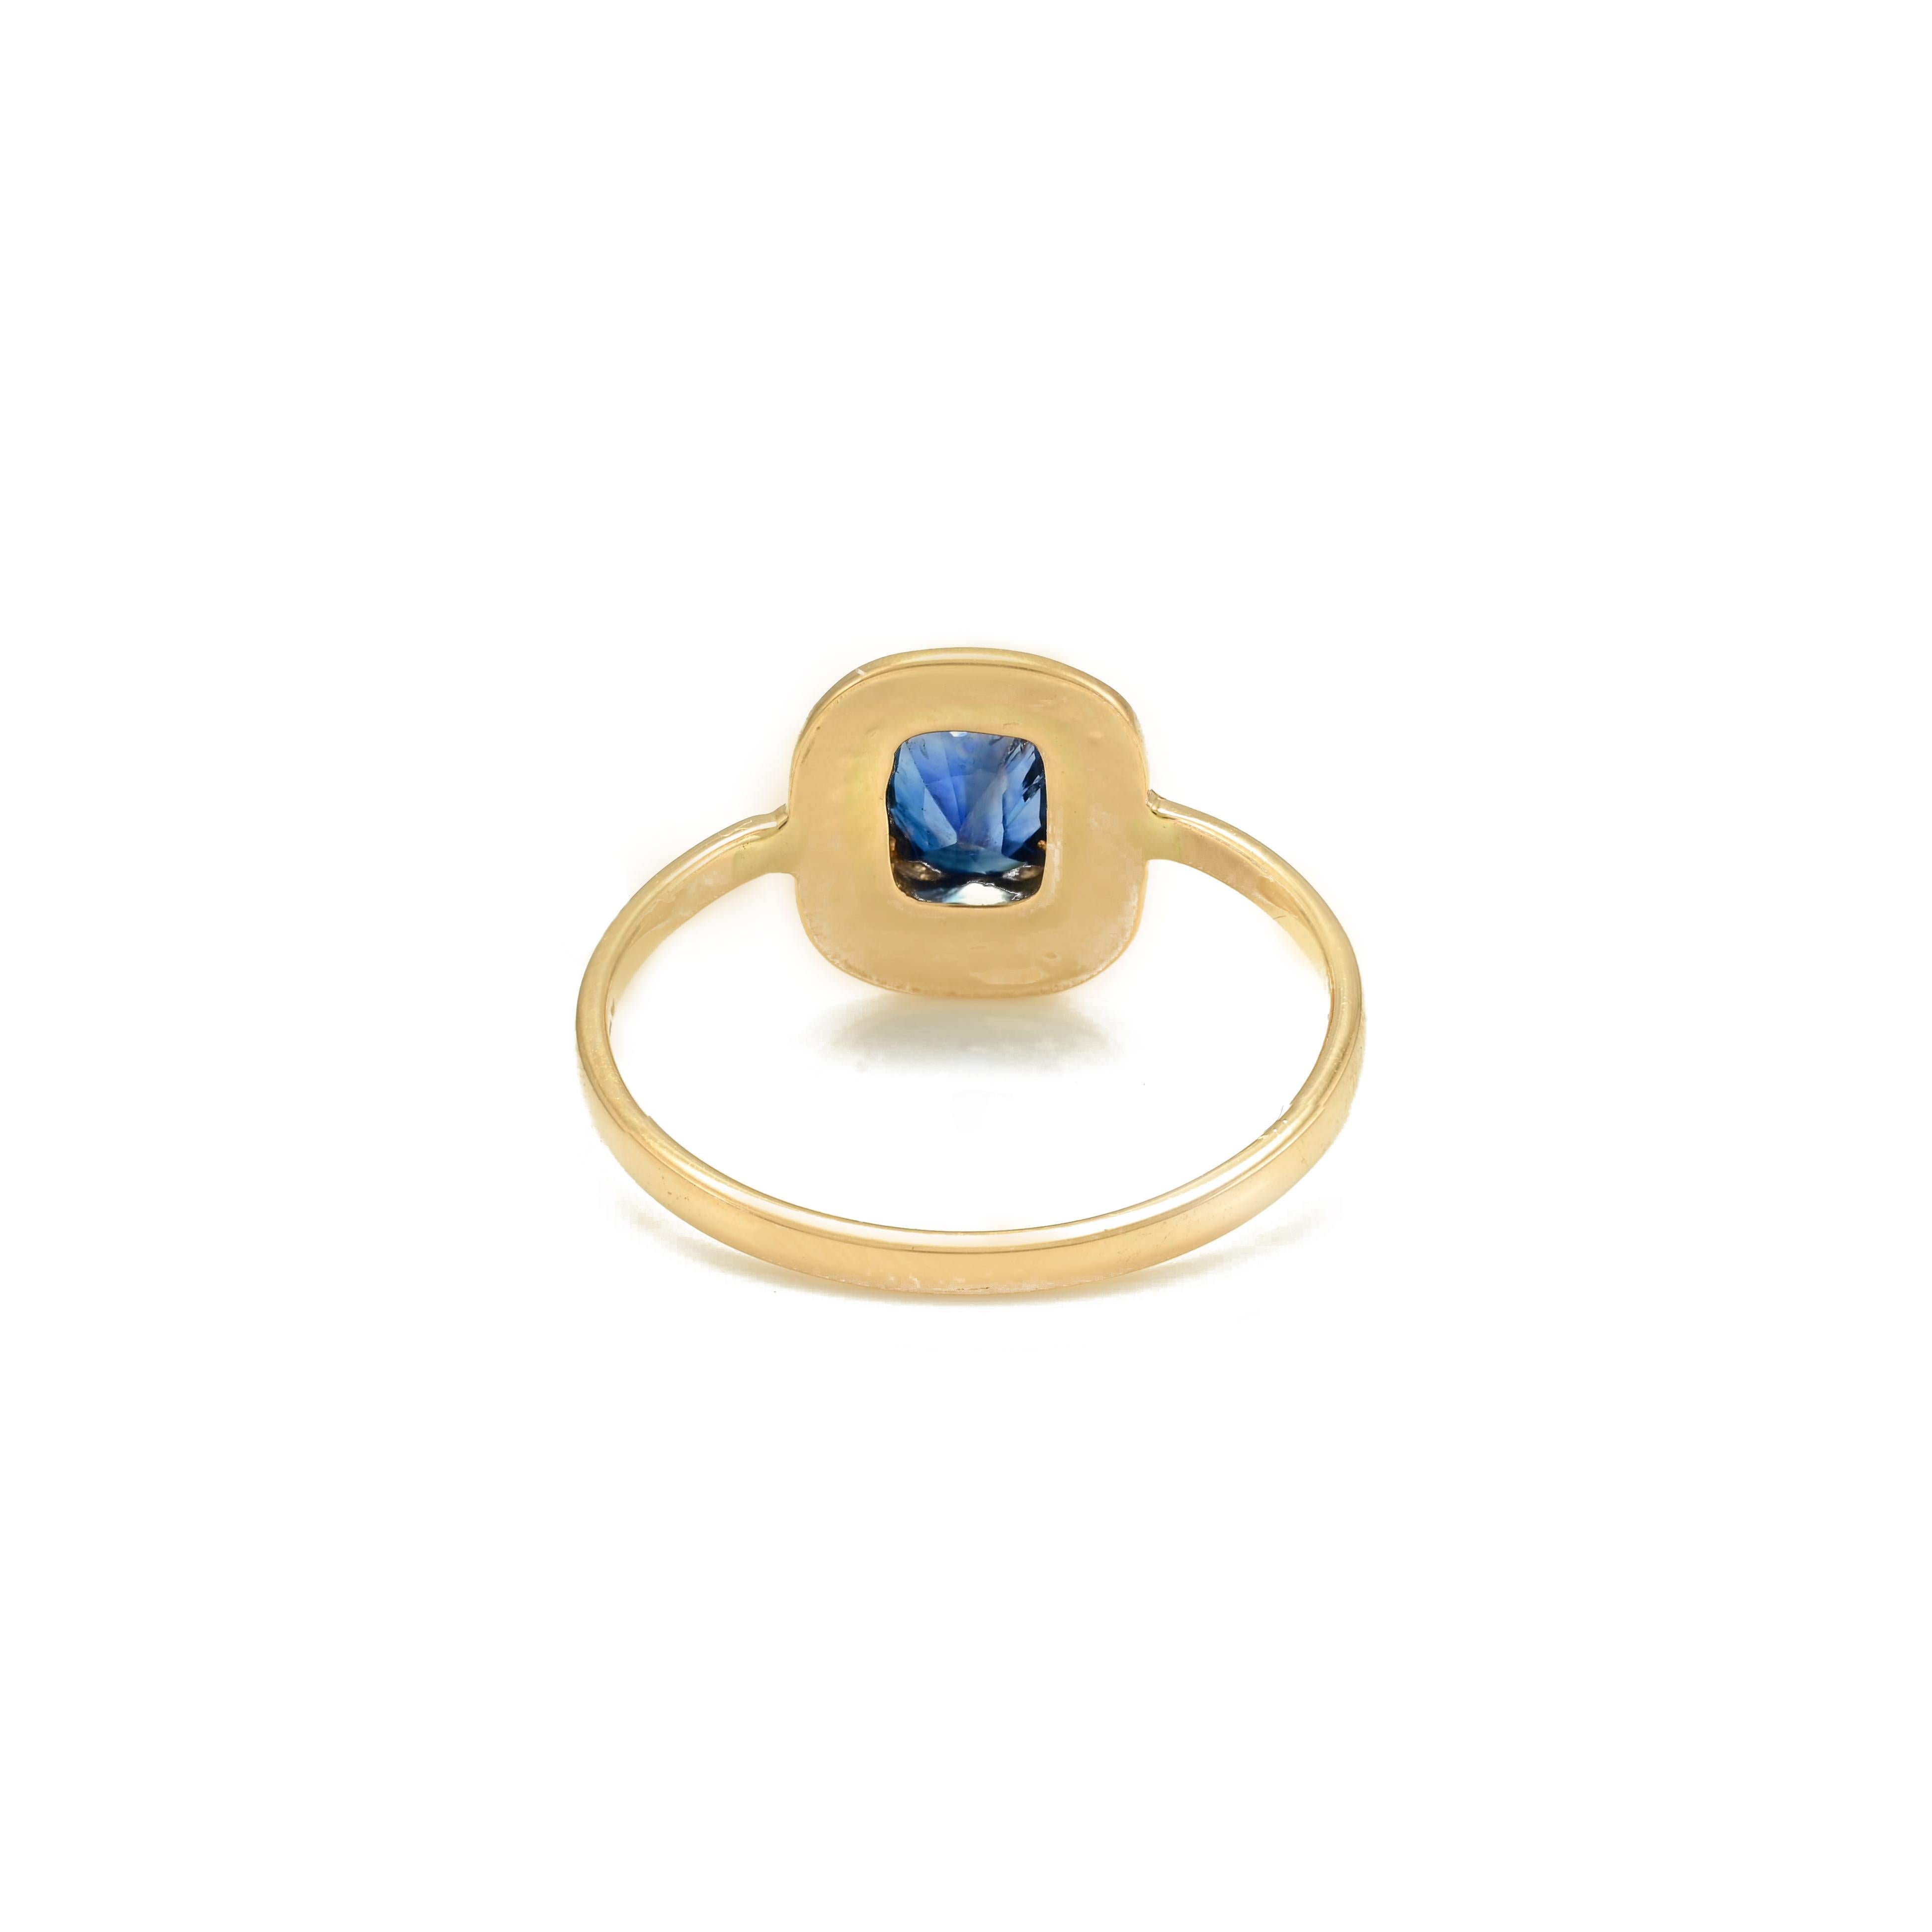 For Sale:  Vintage Deep Bright Blue Sapphire and Diamond Halo Ring 18k Solid Yellow Gold 5